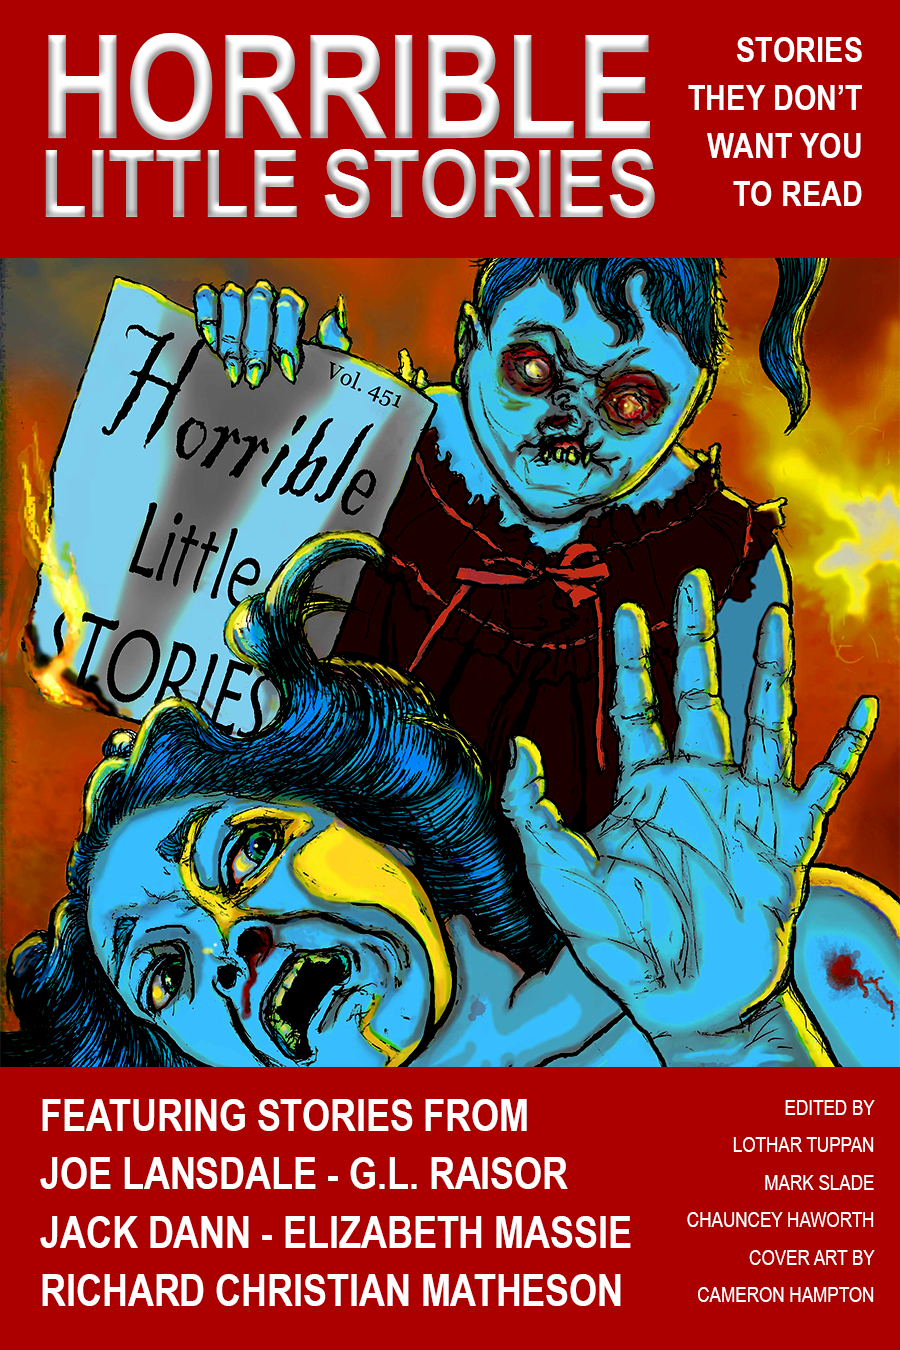 Upcoming: Horrible Little Stories